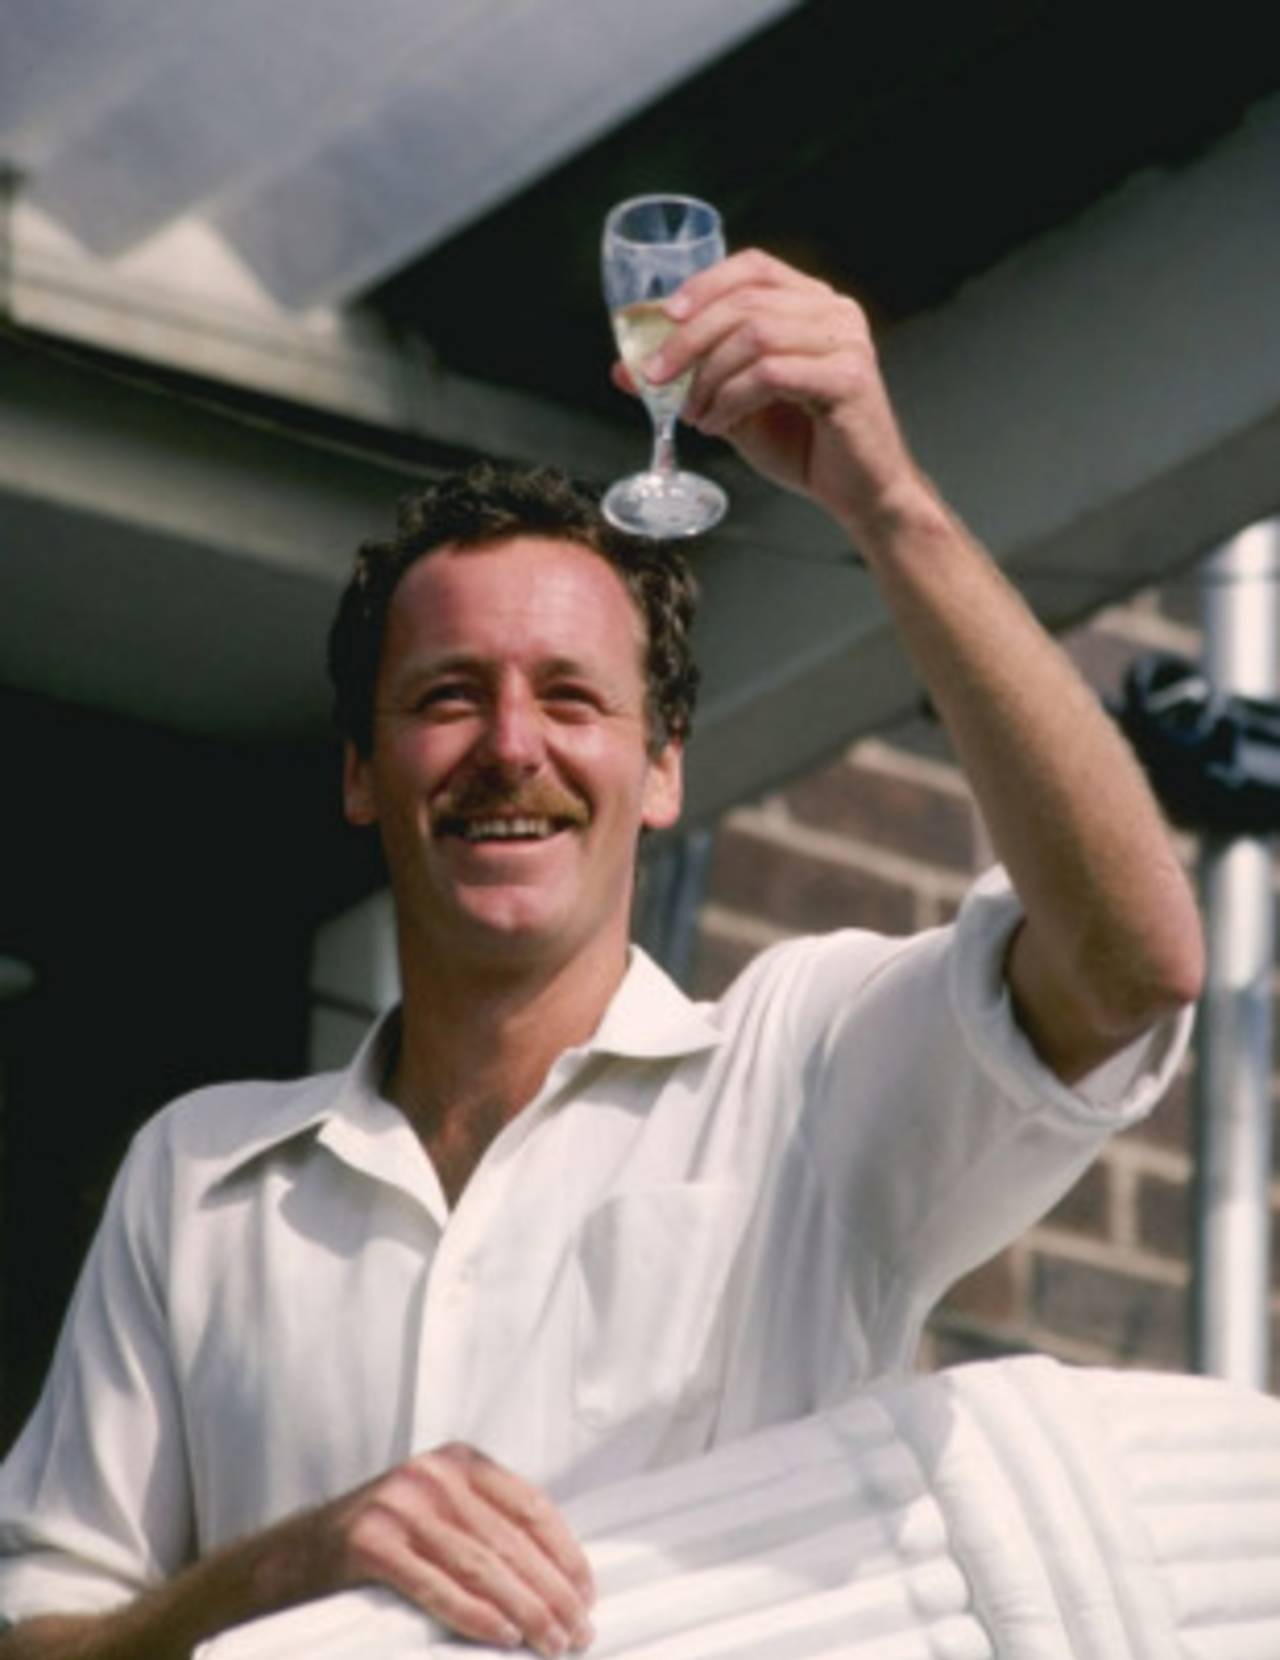 Jeremy Coney raises a glass at the end of the game, England v New Zealand, second Test, Headlingley, 1 August 1983